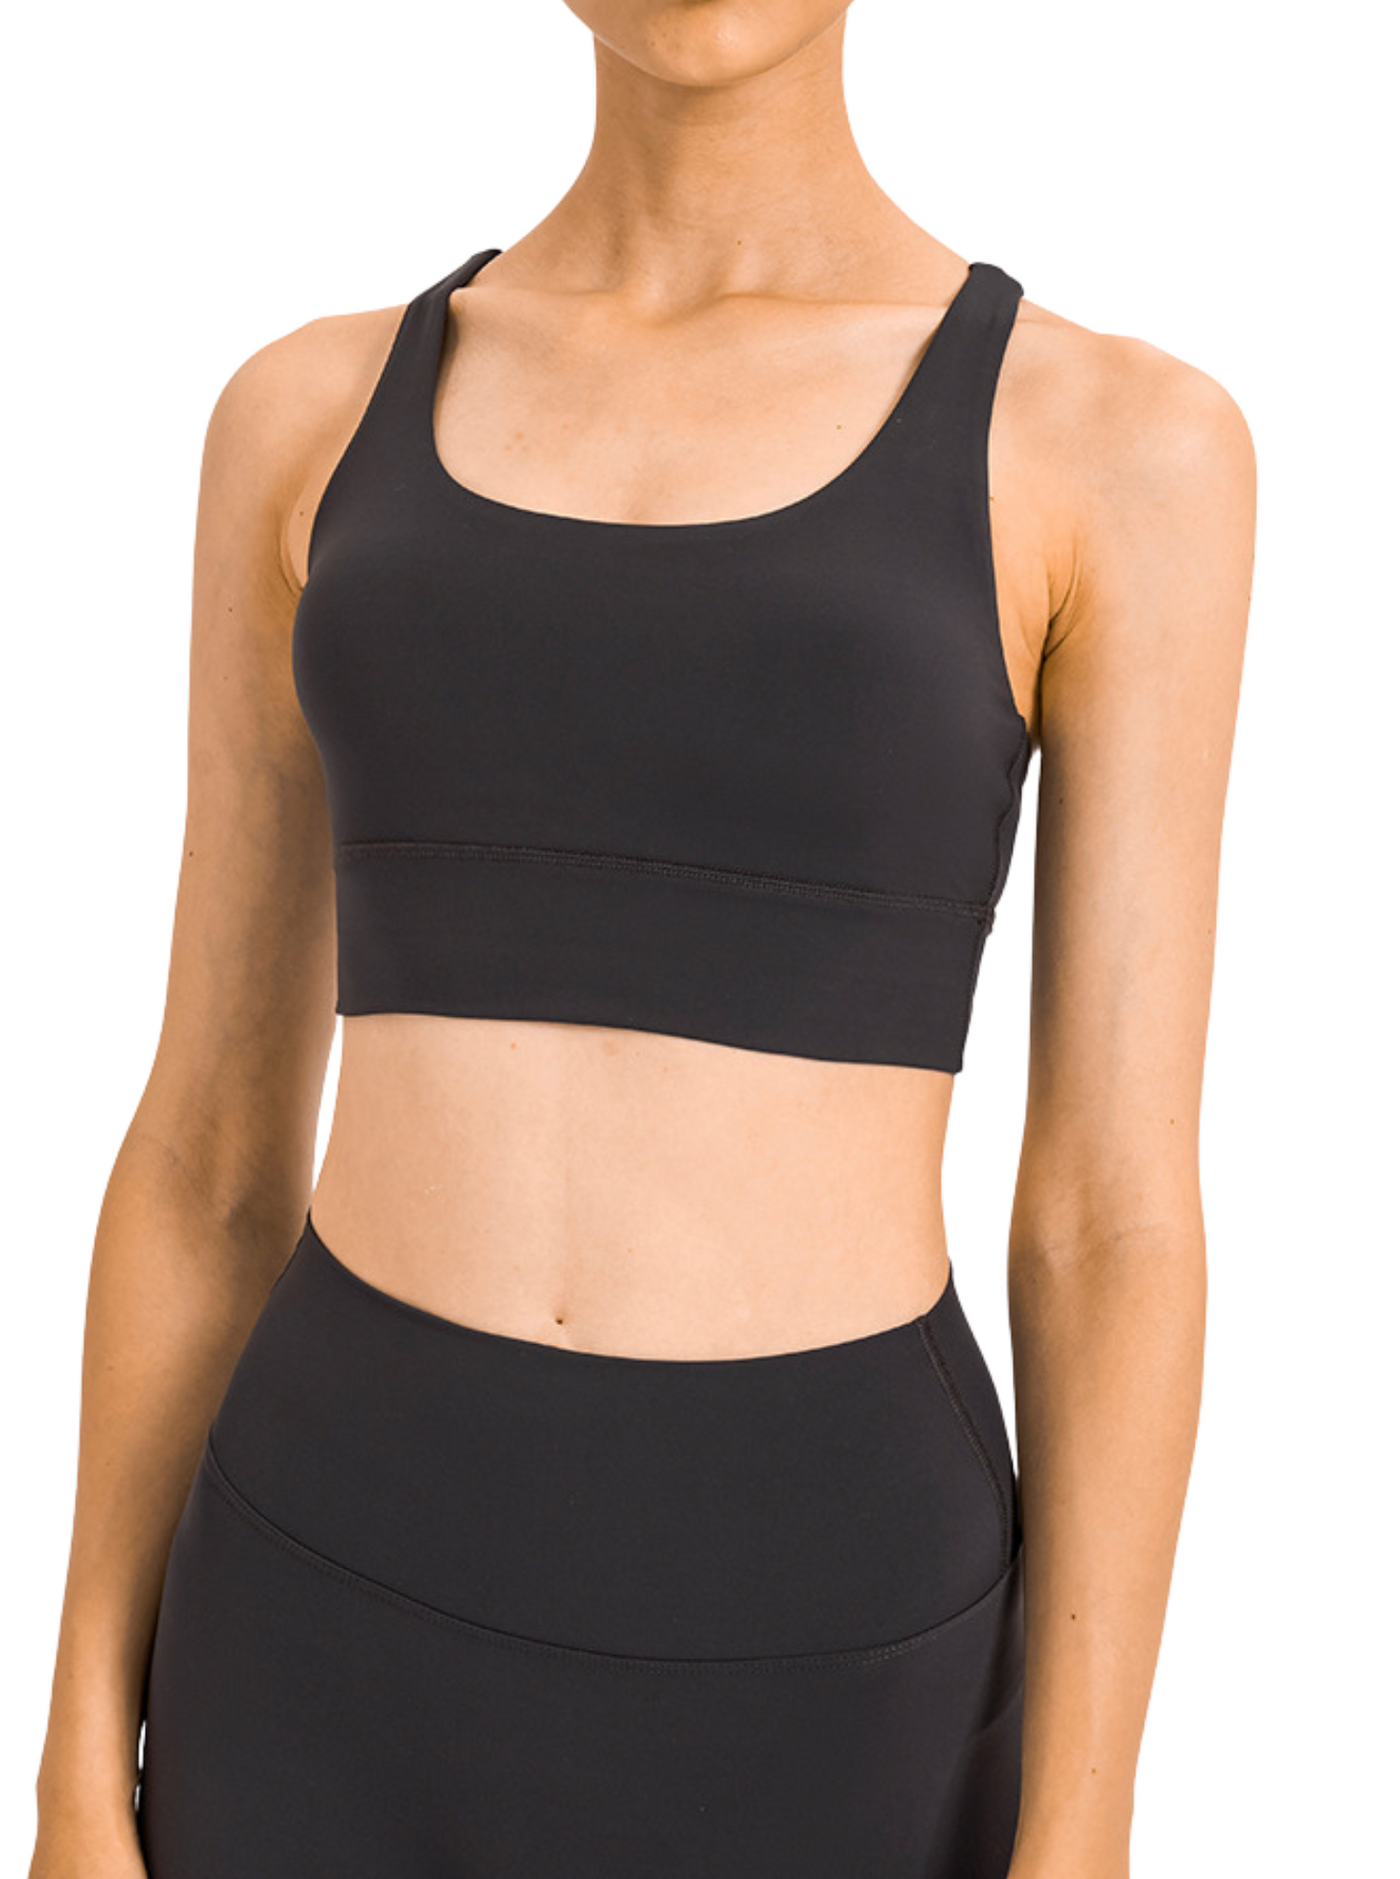 Navalora Fit Amelia Strappy Bra with Removable Pads in Black on Model